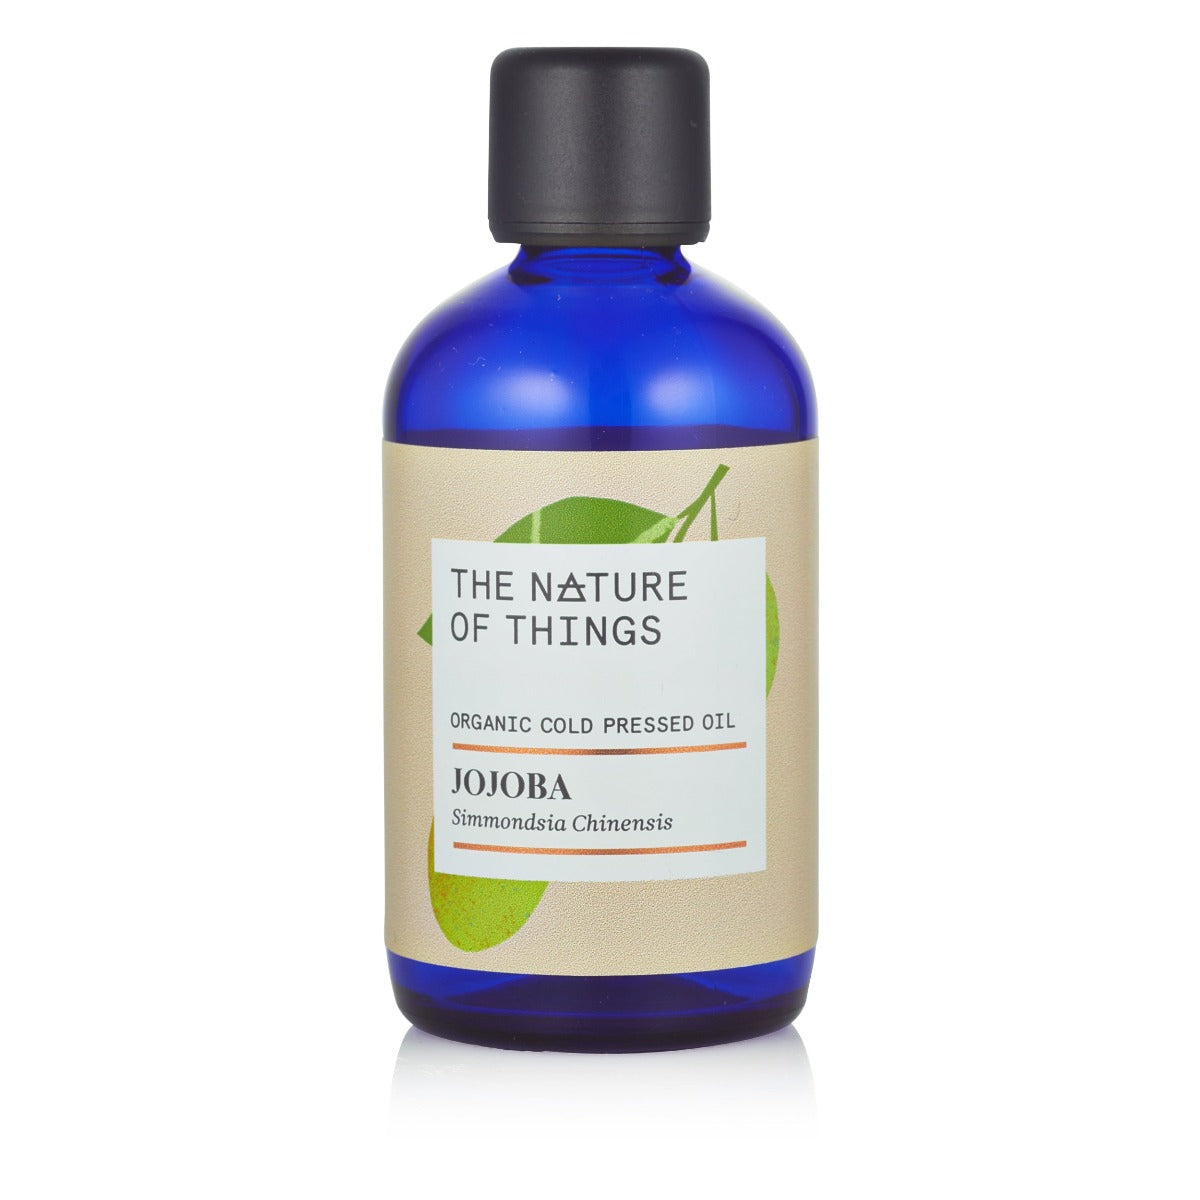 Organic Jojoba Oil from The Nature of Things